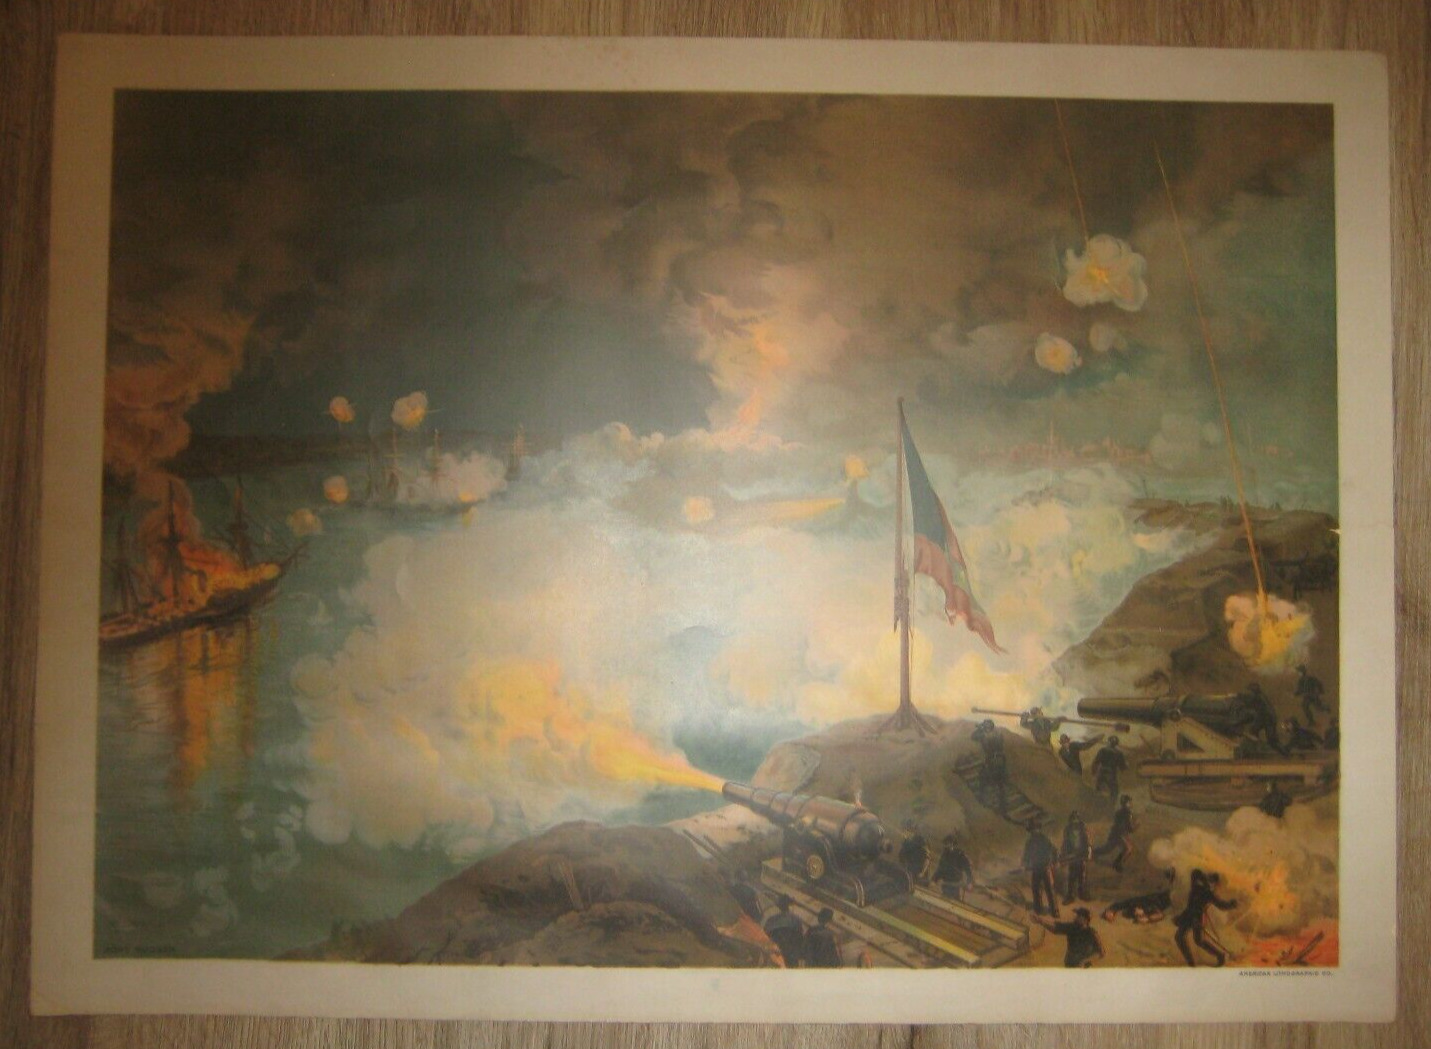 1887, Lithographic Print of the Battle at Port Hudson, L. Prang & Co.